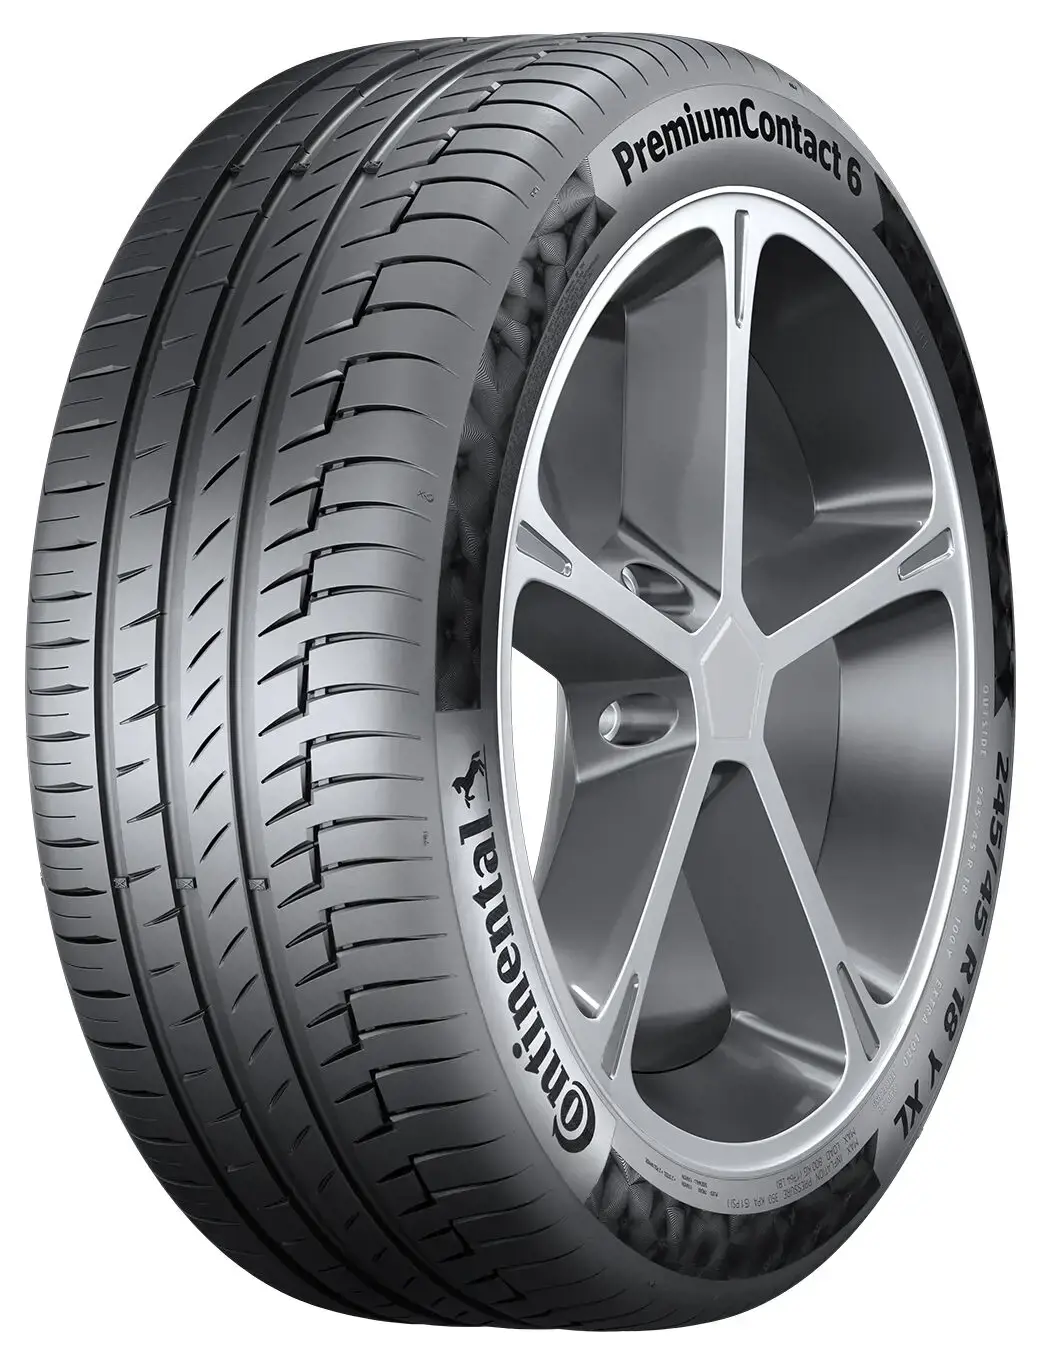 88H 6 PremiumContact Continental R15 185/65